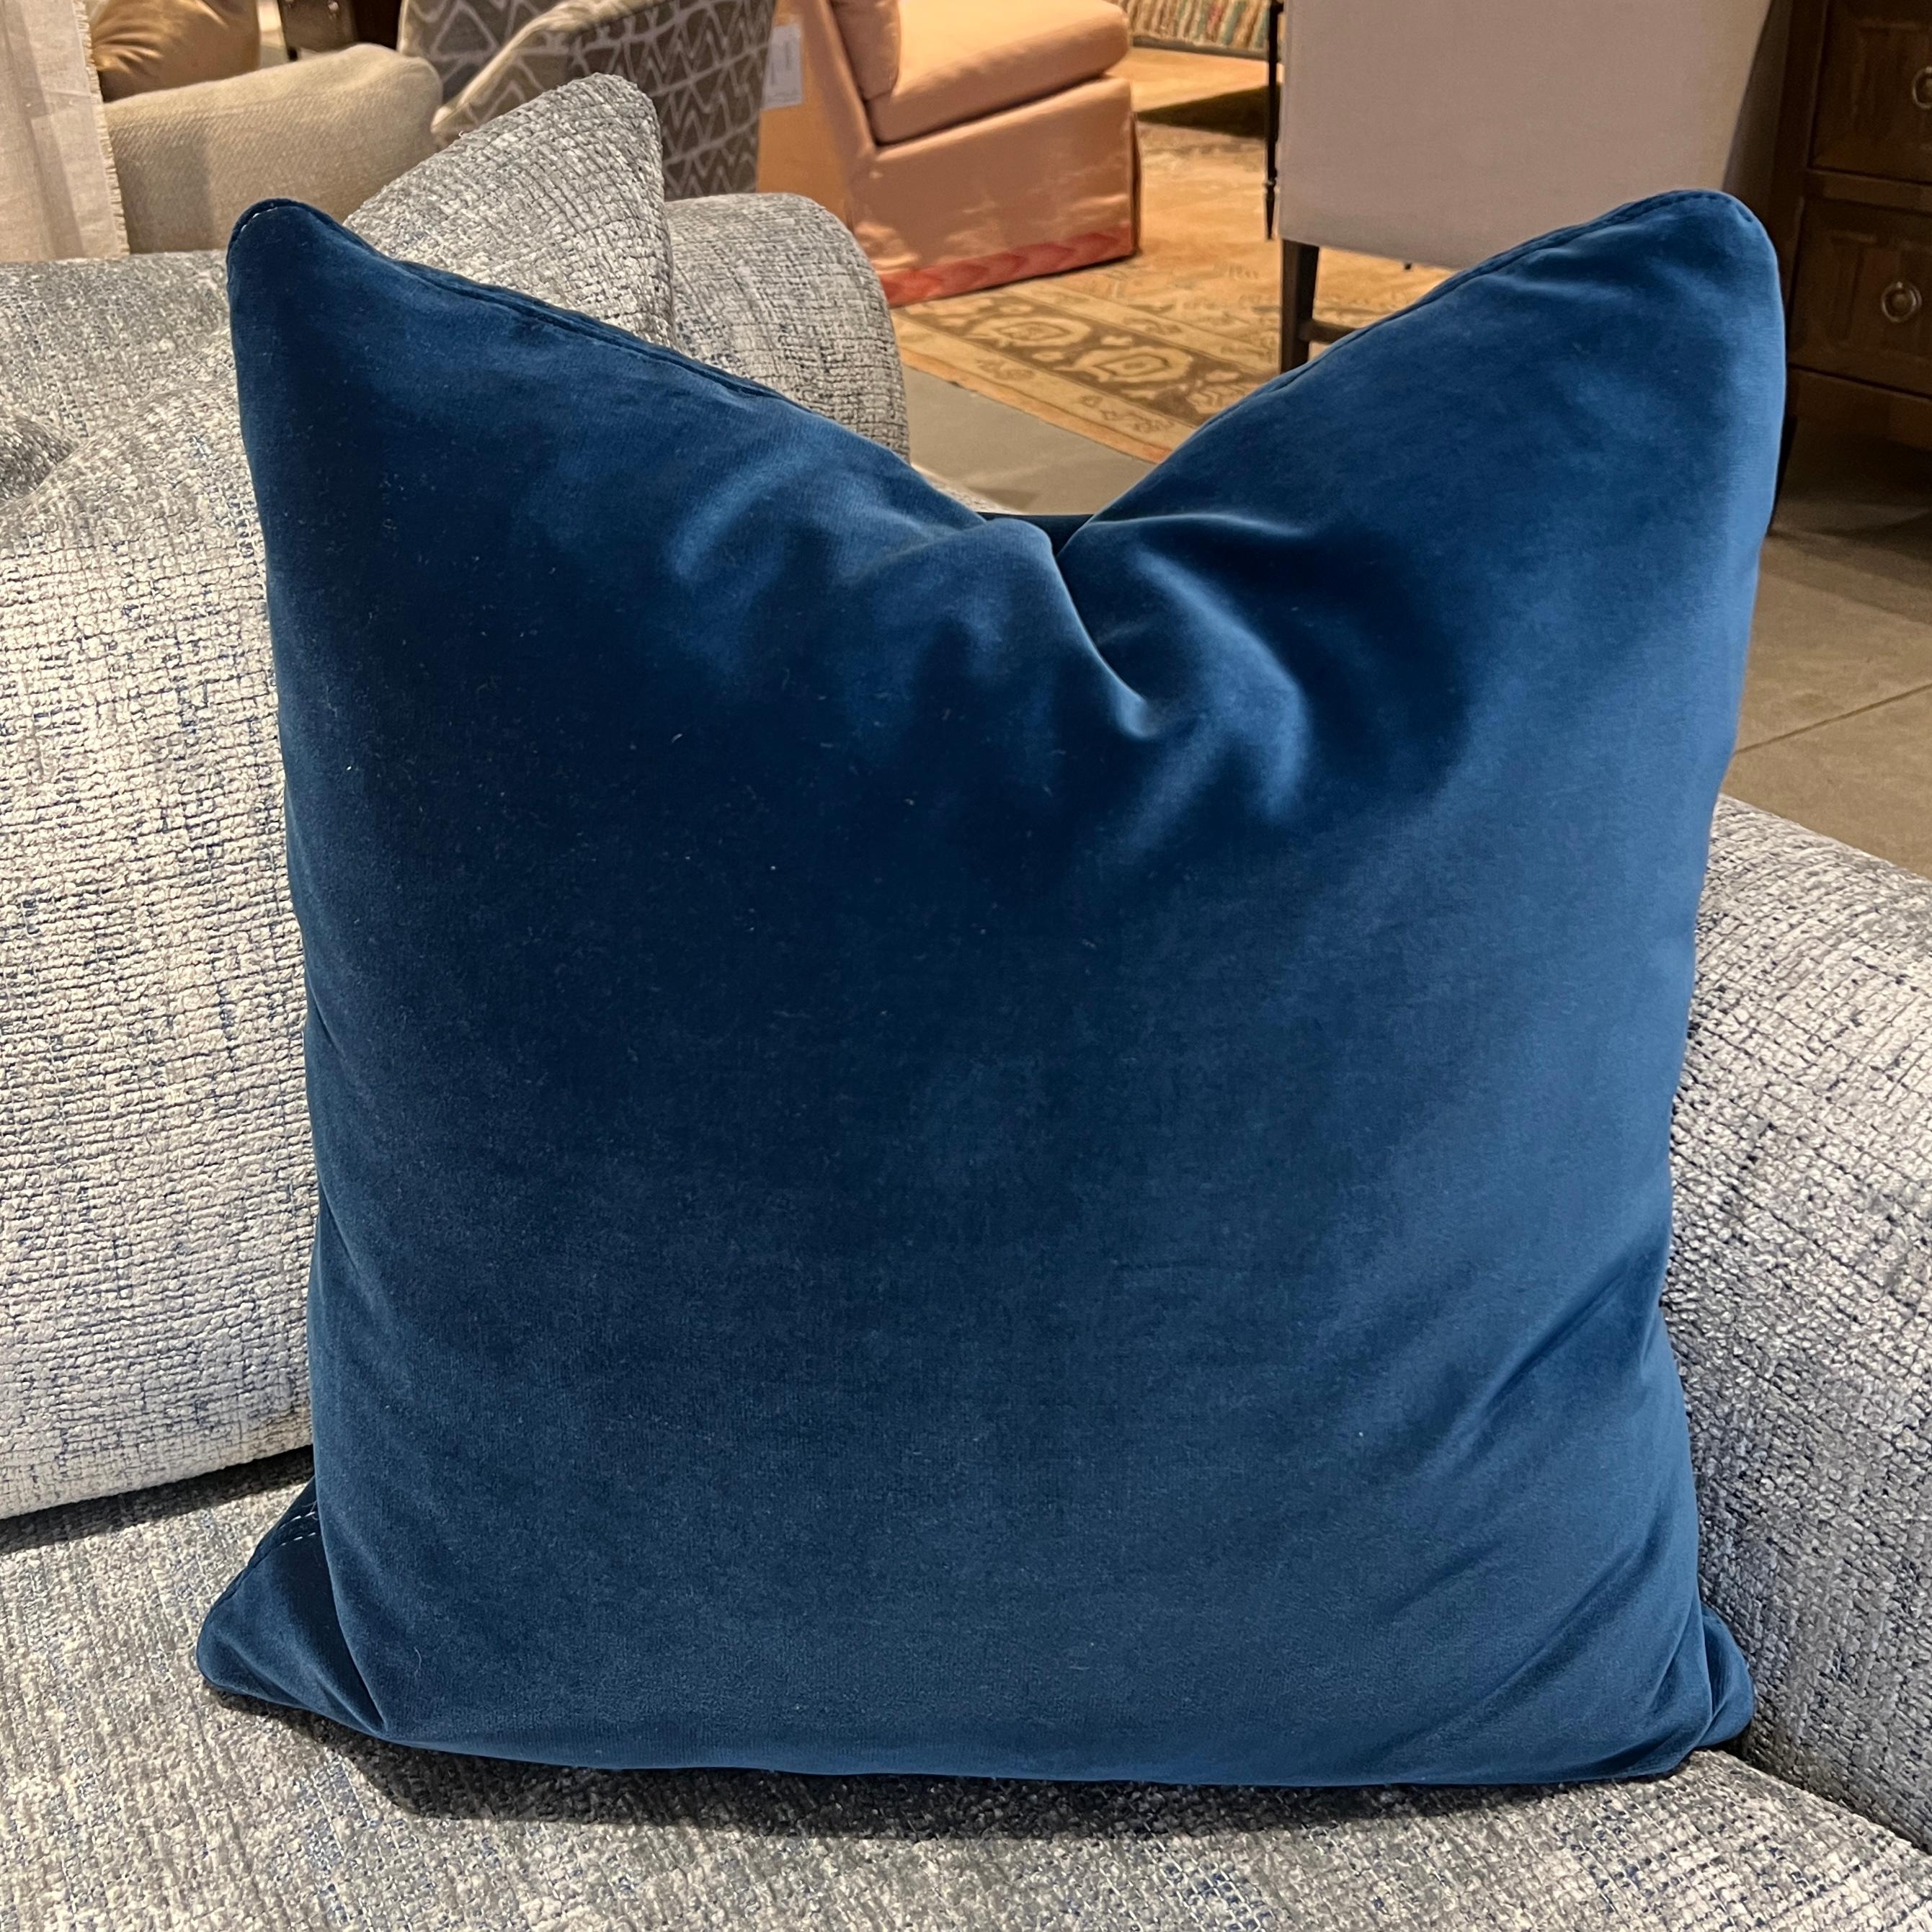 Ultra-soft crushed velvet pillow from Lee Industries. Add an elevated touch to your living room or bedroom. Topstitch finish with hidden zipper. Feather down pillow insert included.
Color: Peacock
Fabric content: 50% Acrylic, 26% Cotton, and 24%